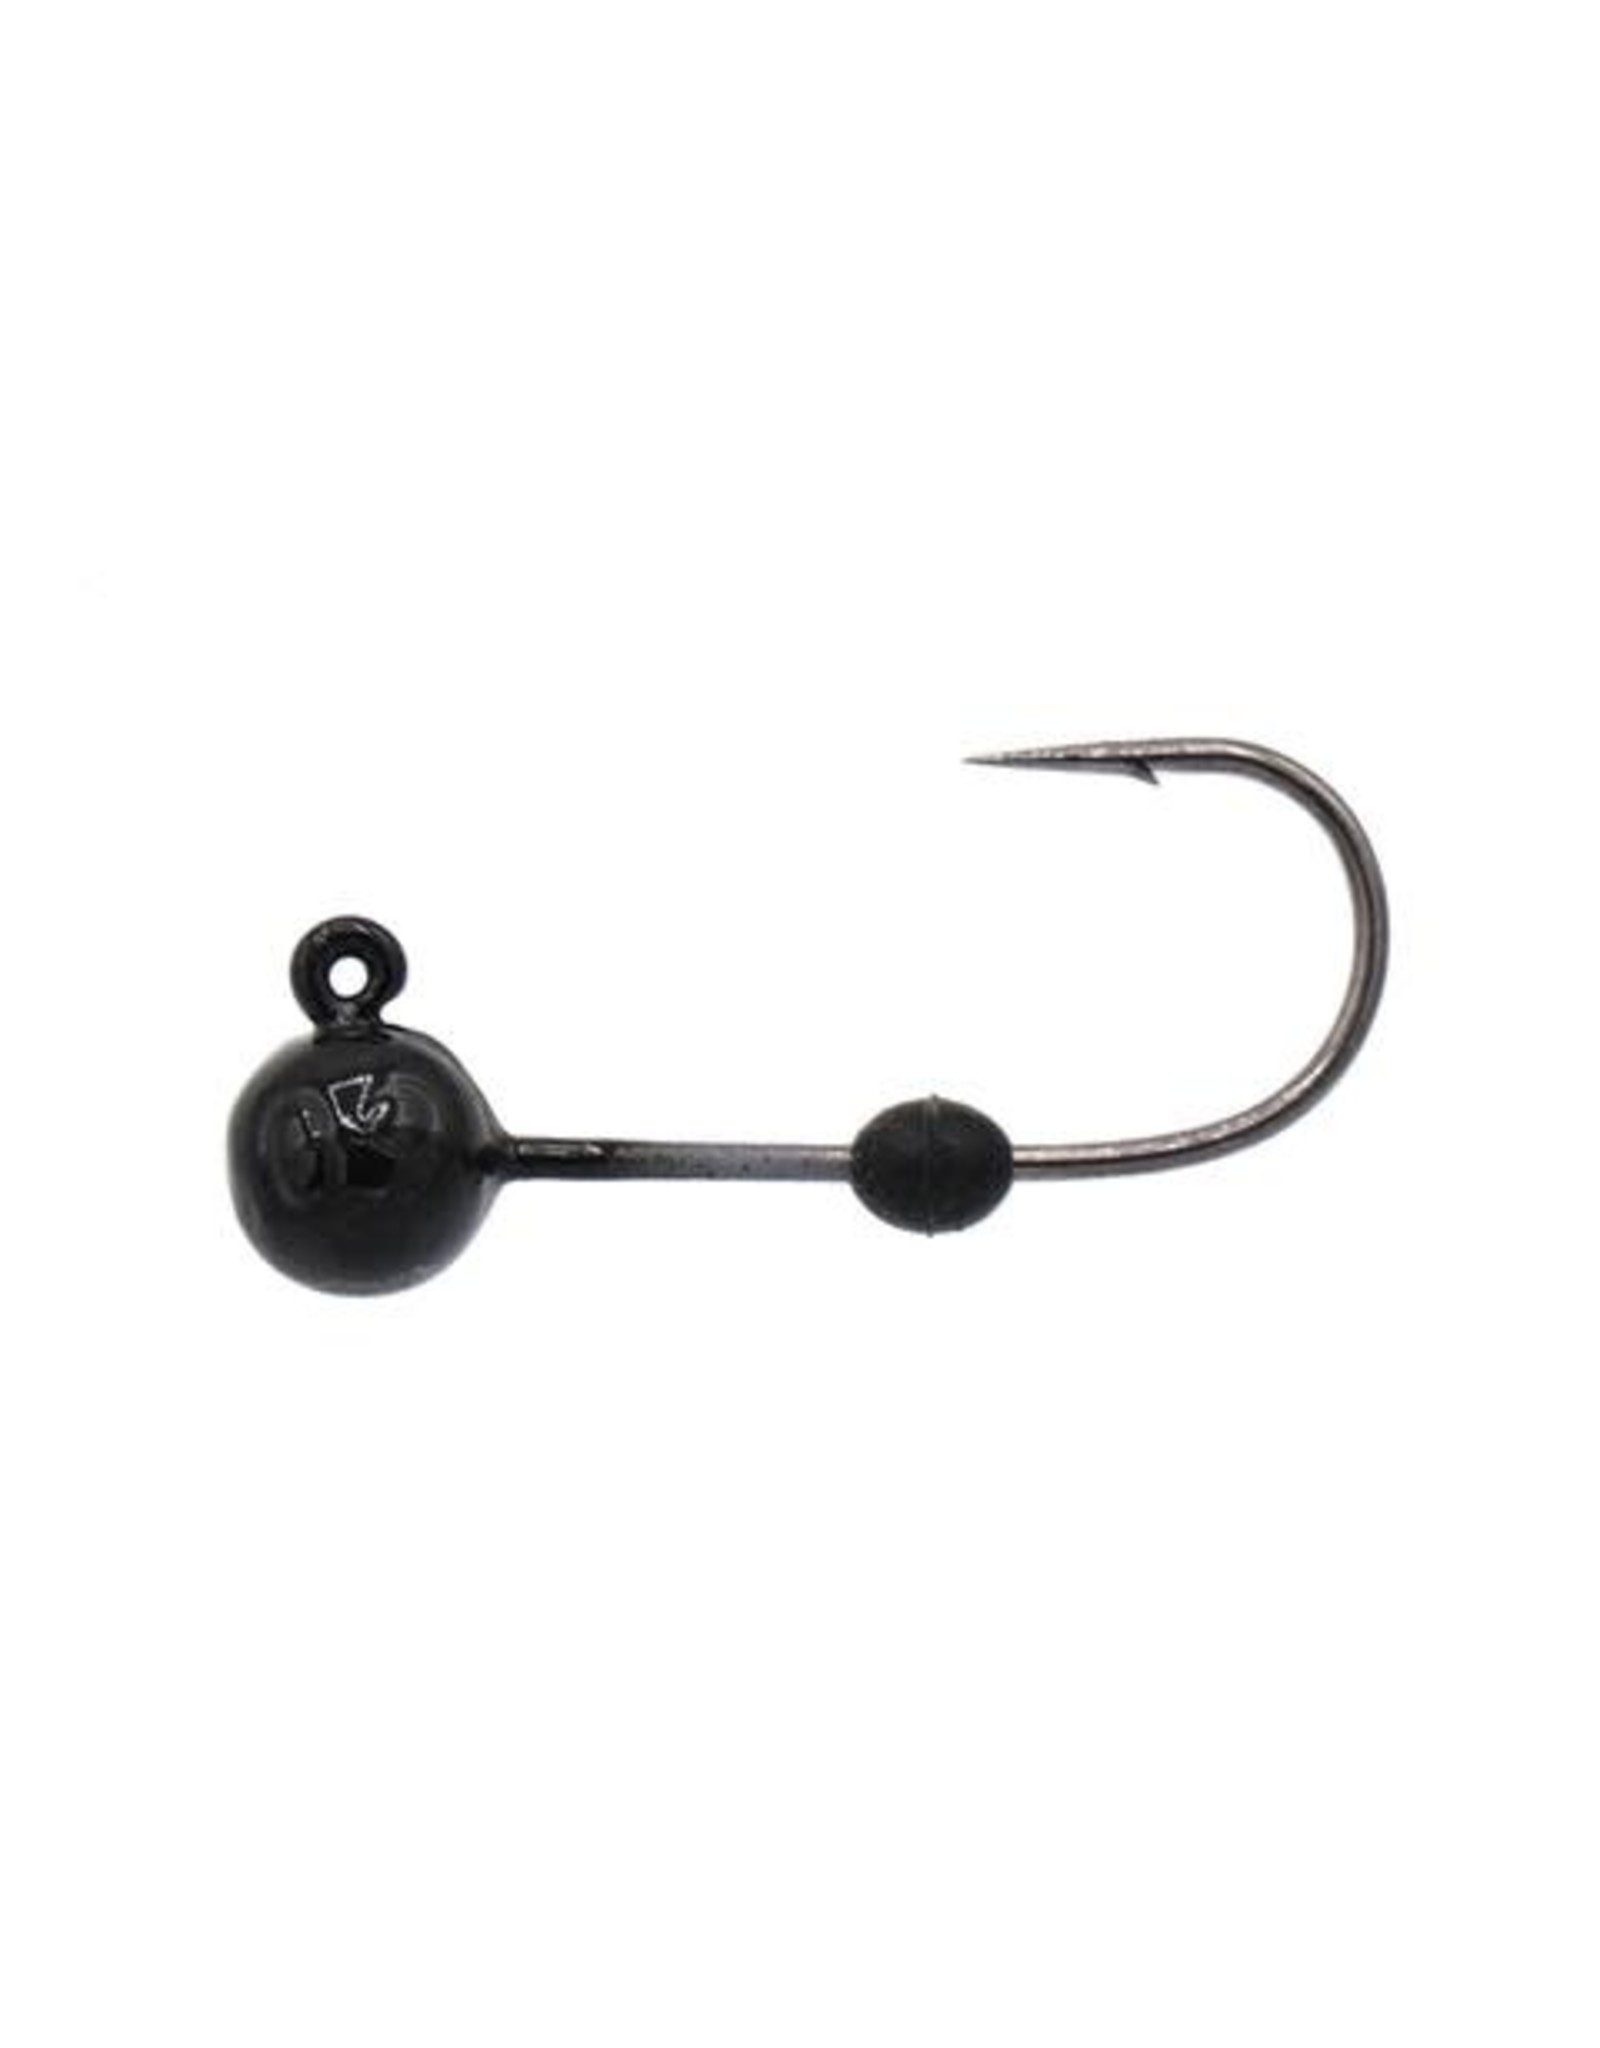 Eurotackle Eurotackle Micro Finesse Tungsten Soft-Lock Jig Heads